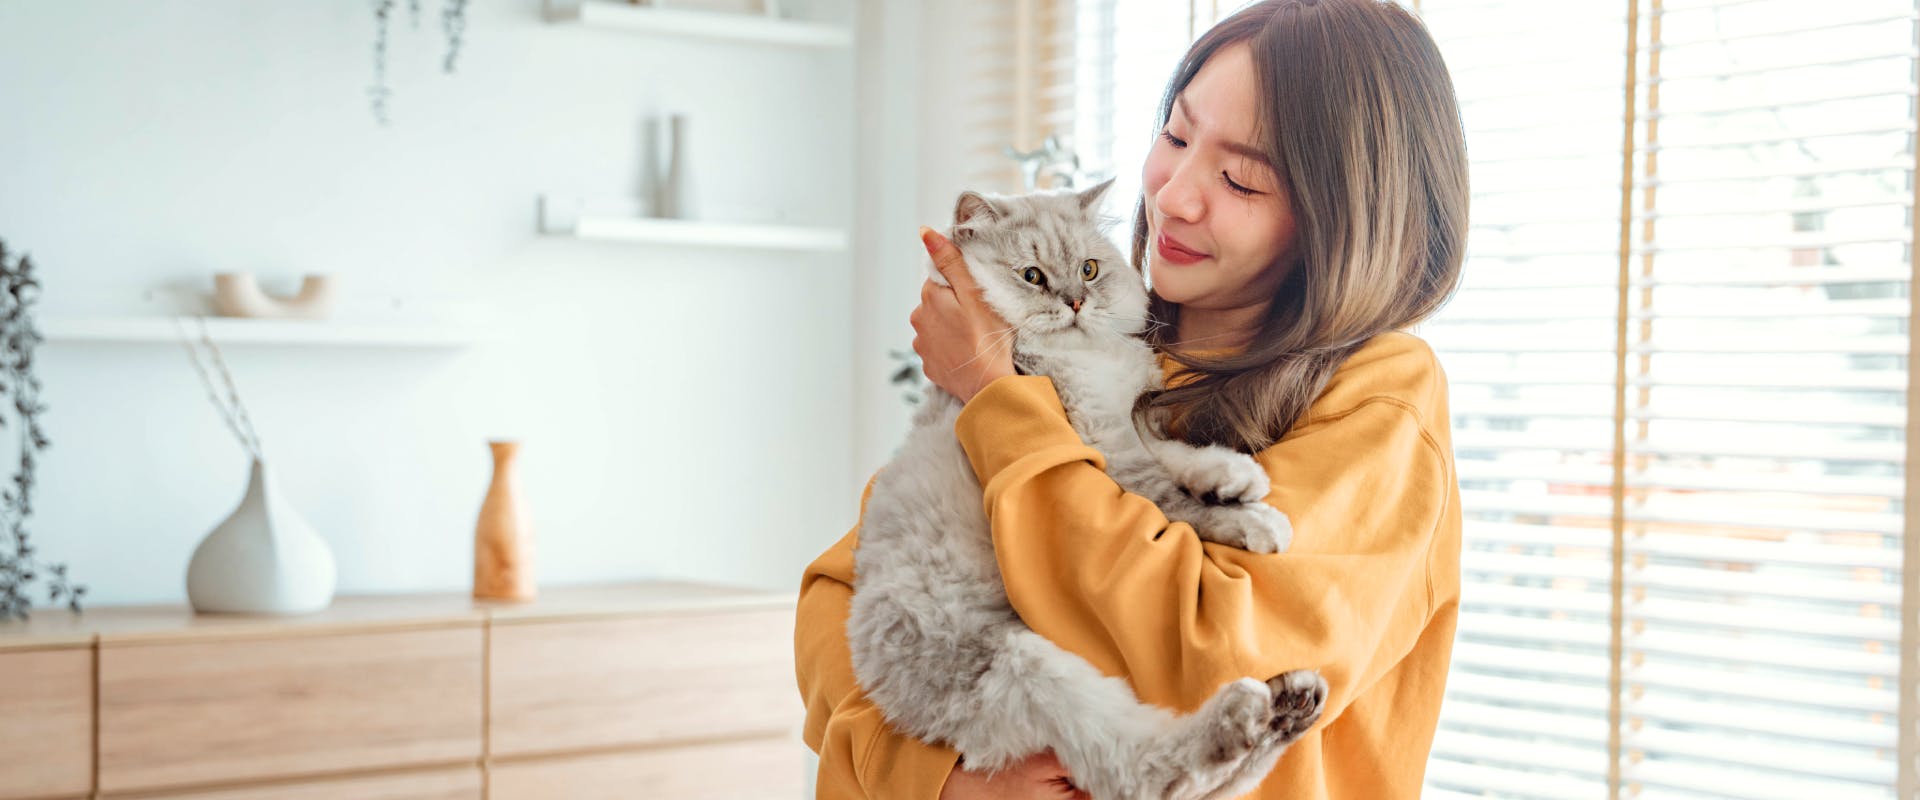 a woman in a yellow jumper cradling and stroking a long haired cat